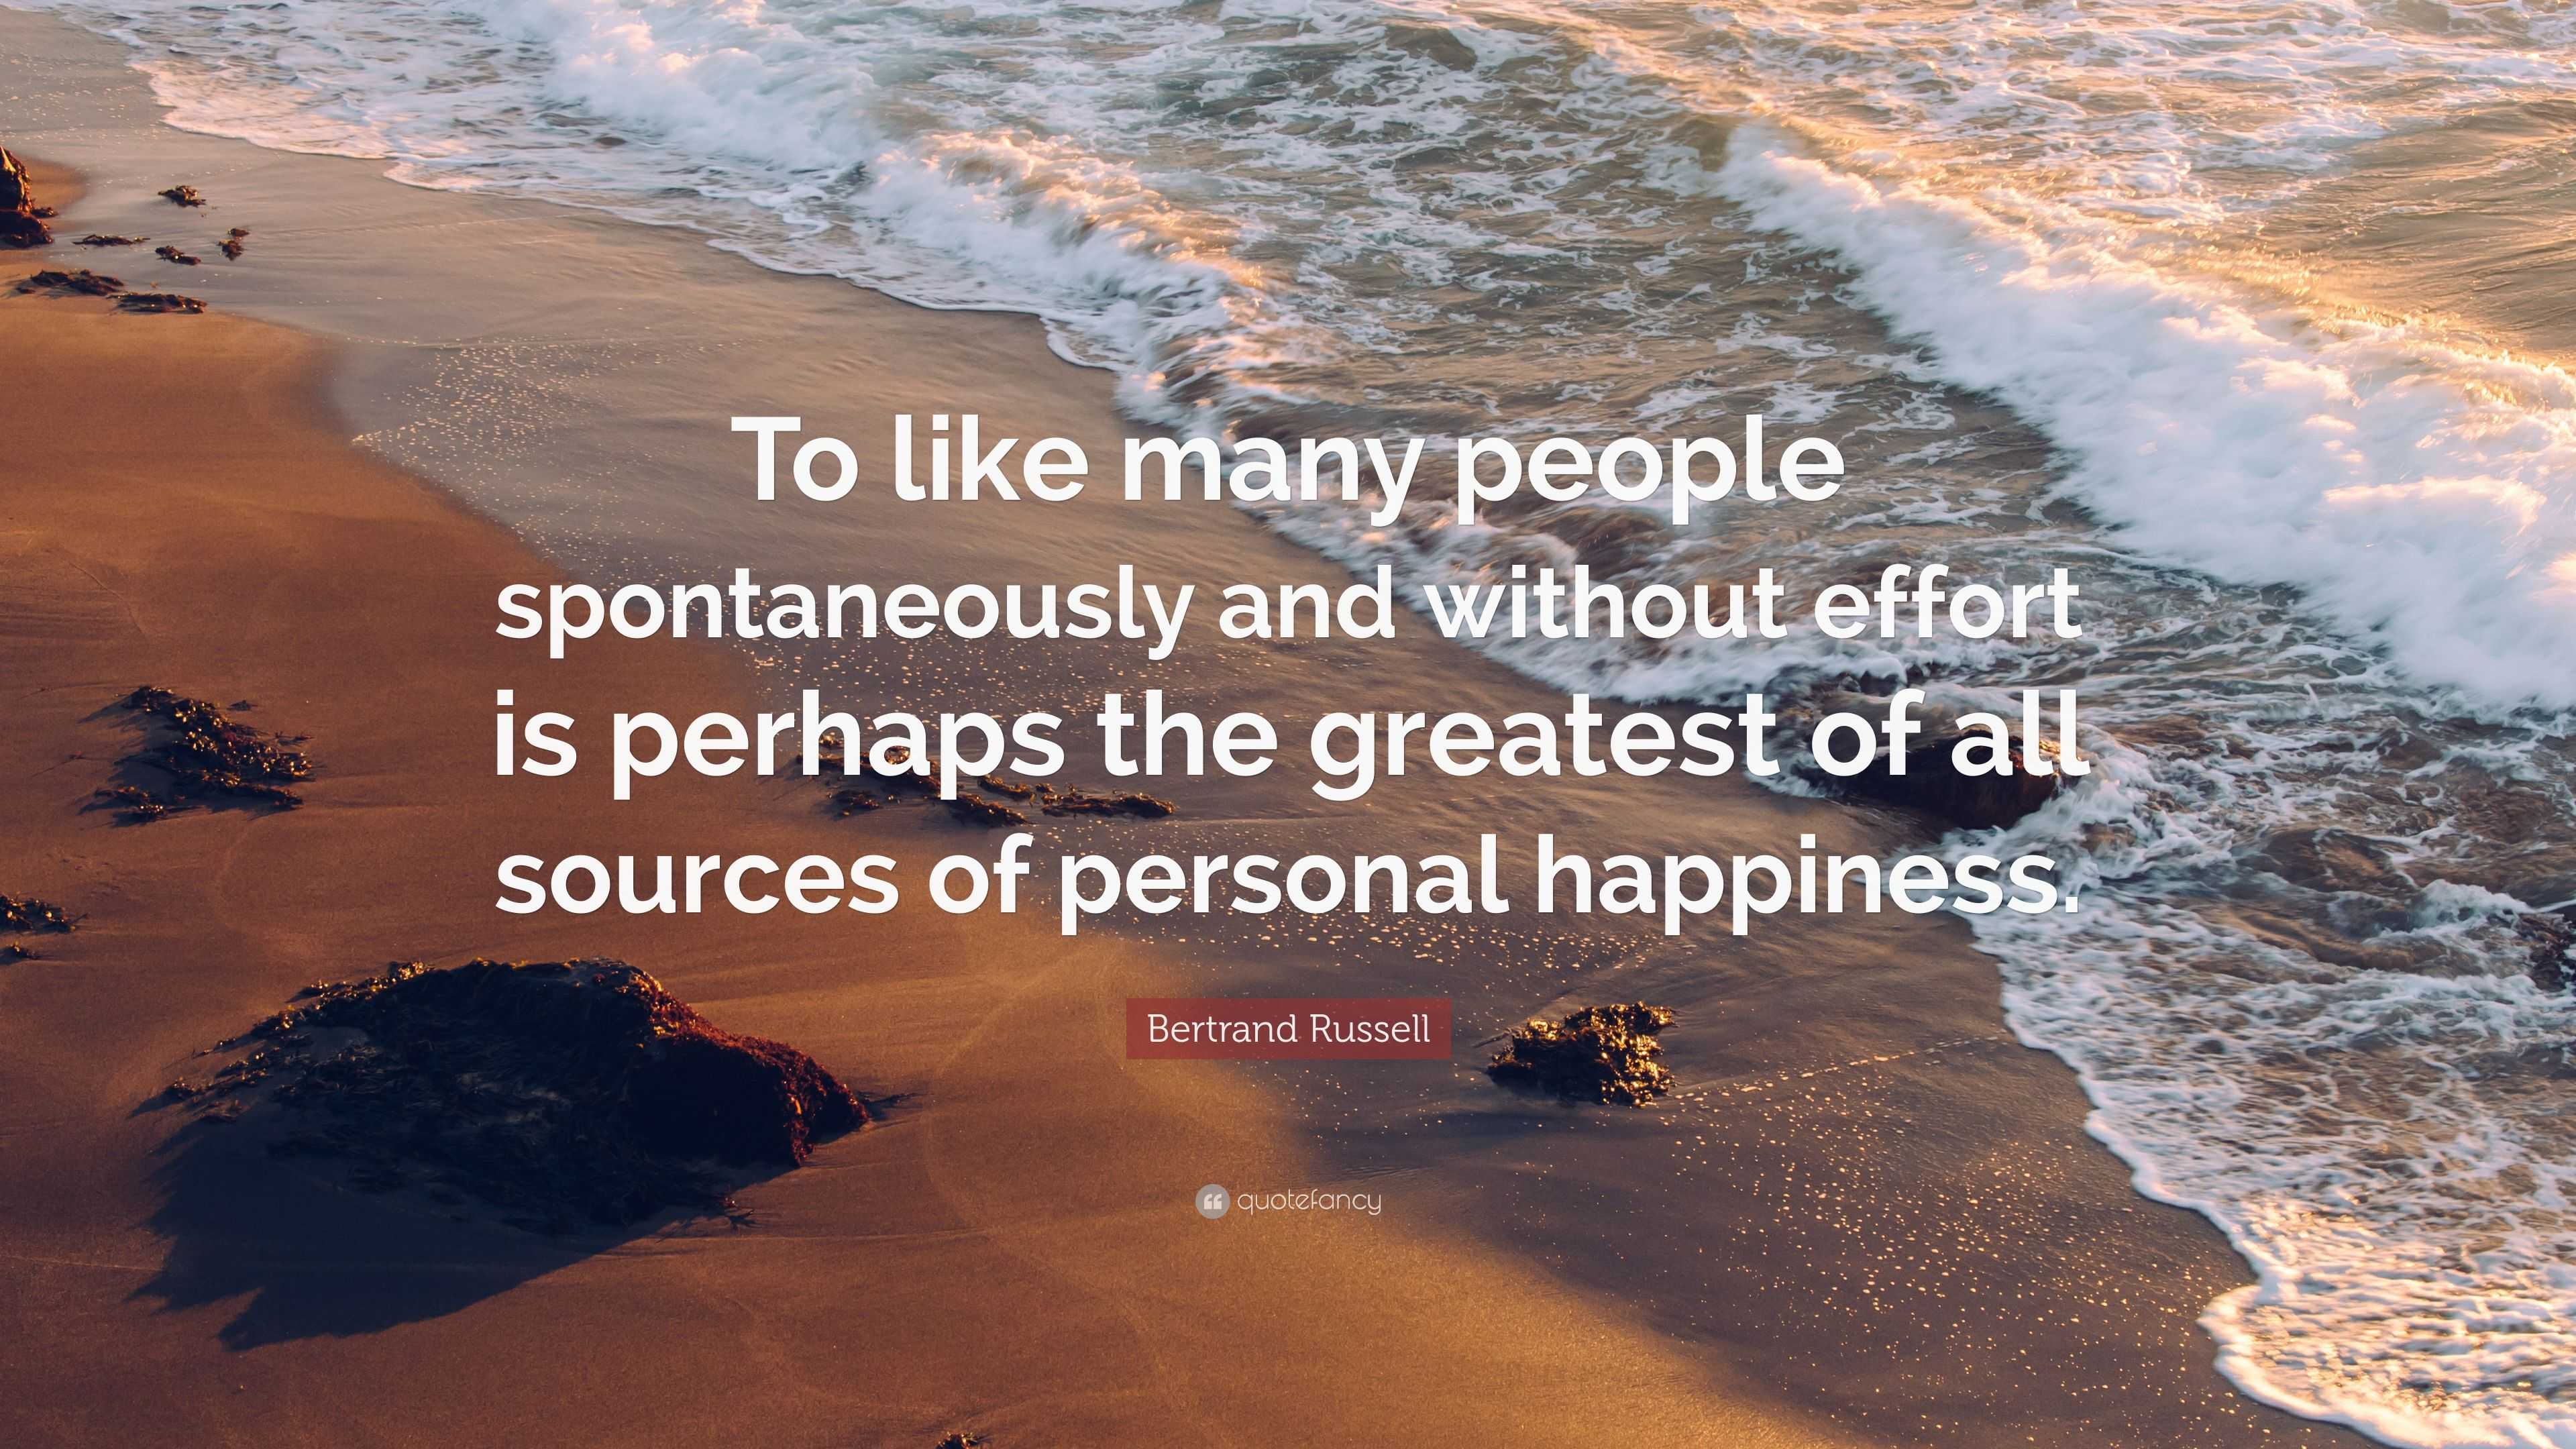 Bertrand Russell Quote: “To like many people spontaneously and without ...